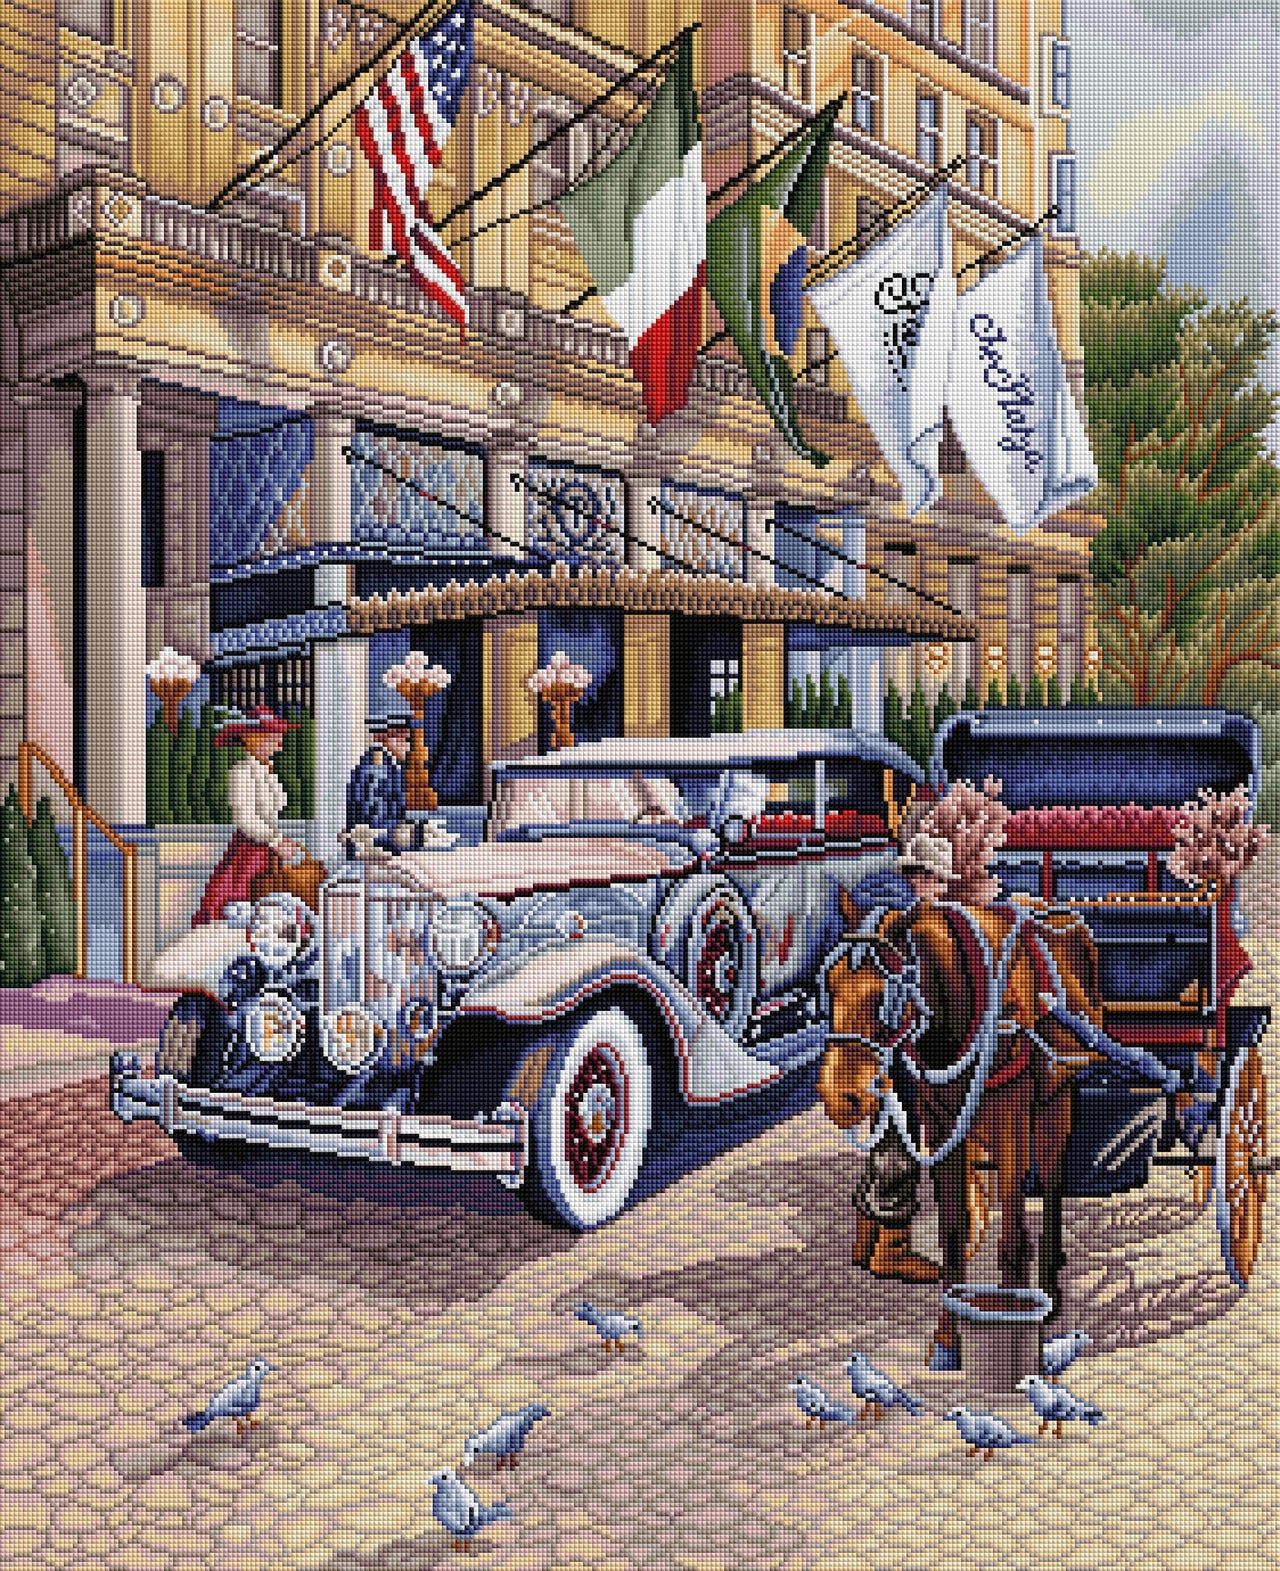 Diamond Painting New York Ride 27.6" x 33.9" (70cm x 86cm) / Square With 59 Colors Including 3 ABs / 96,945